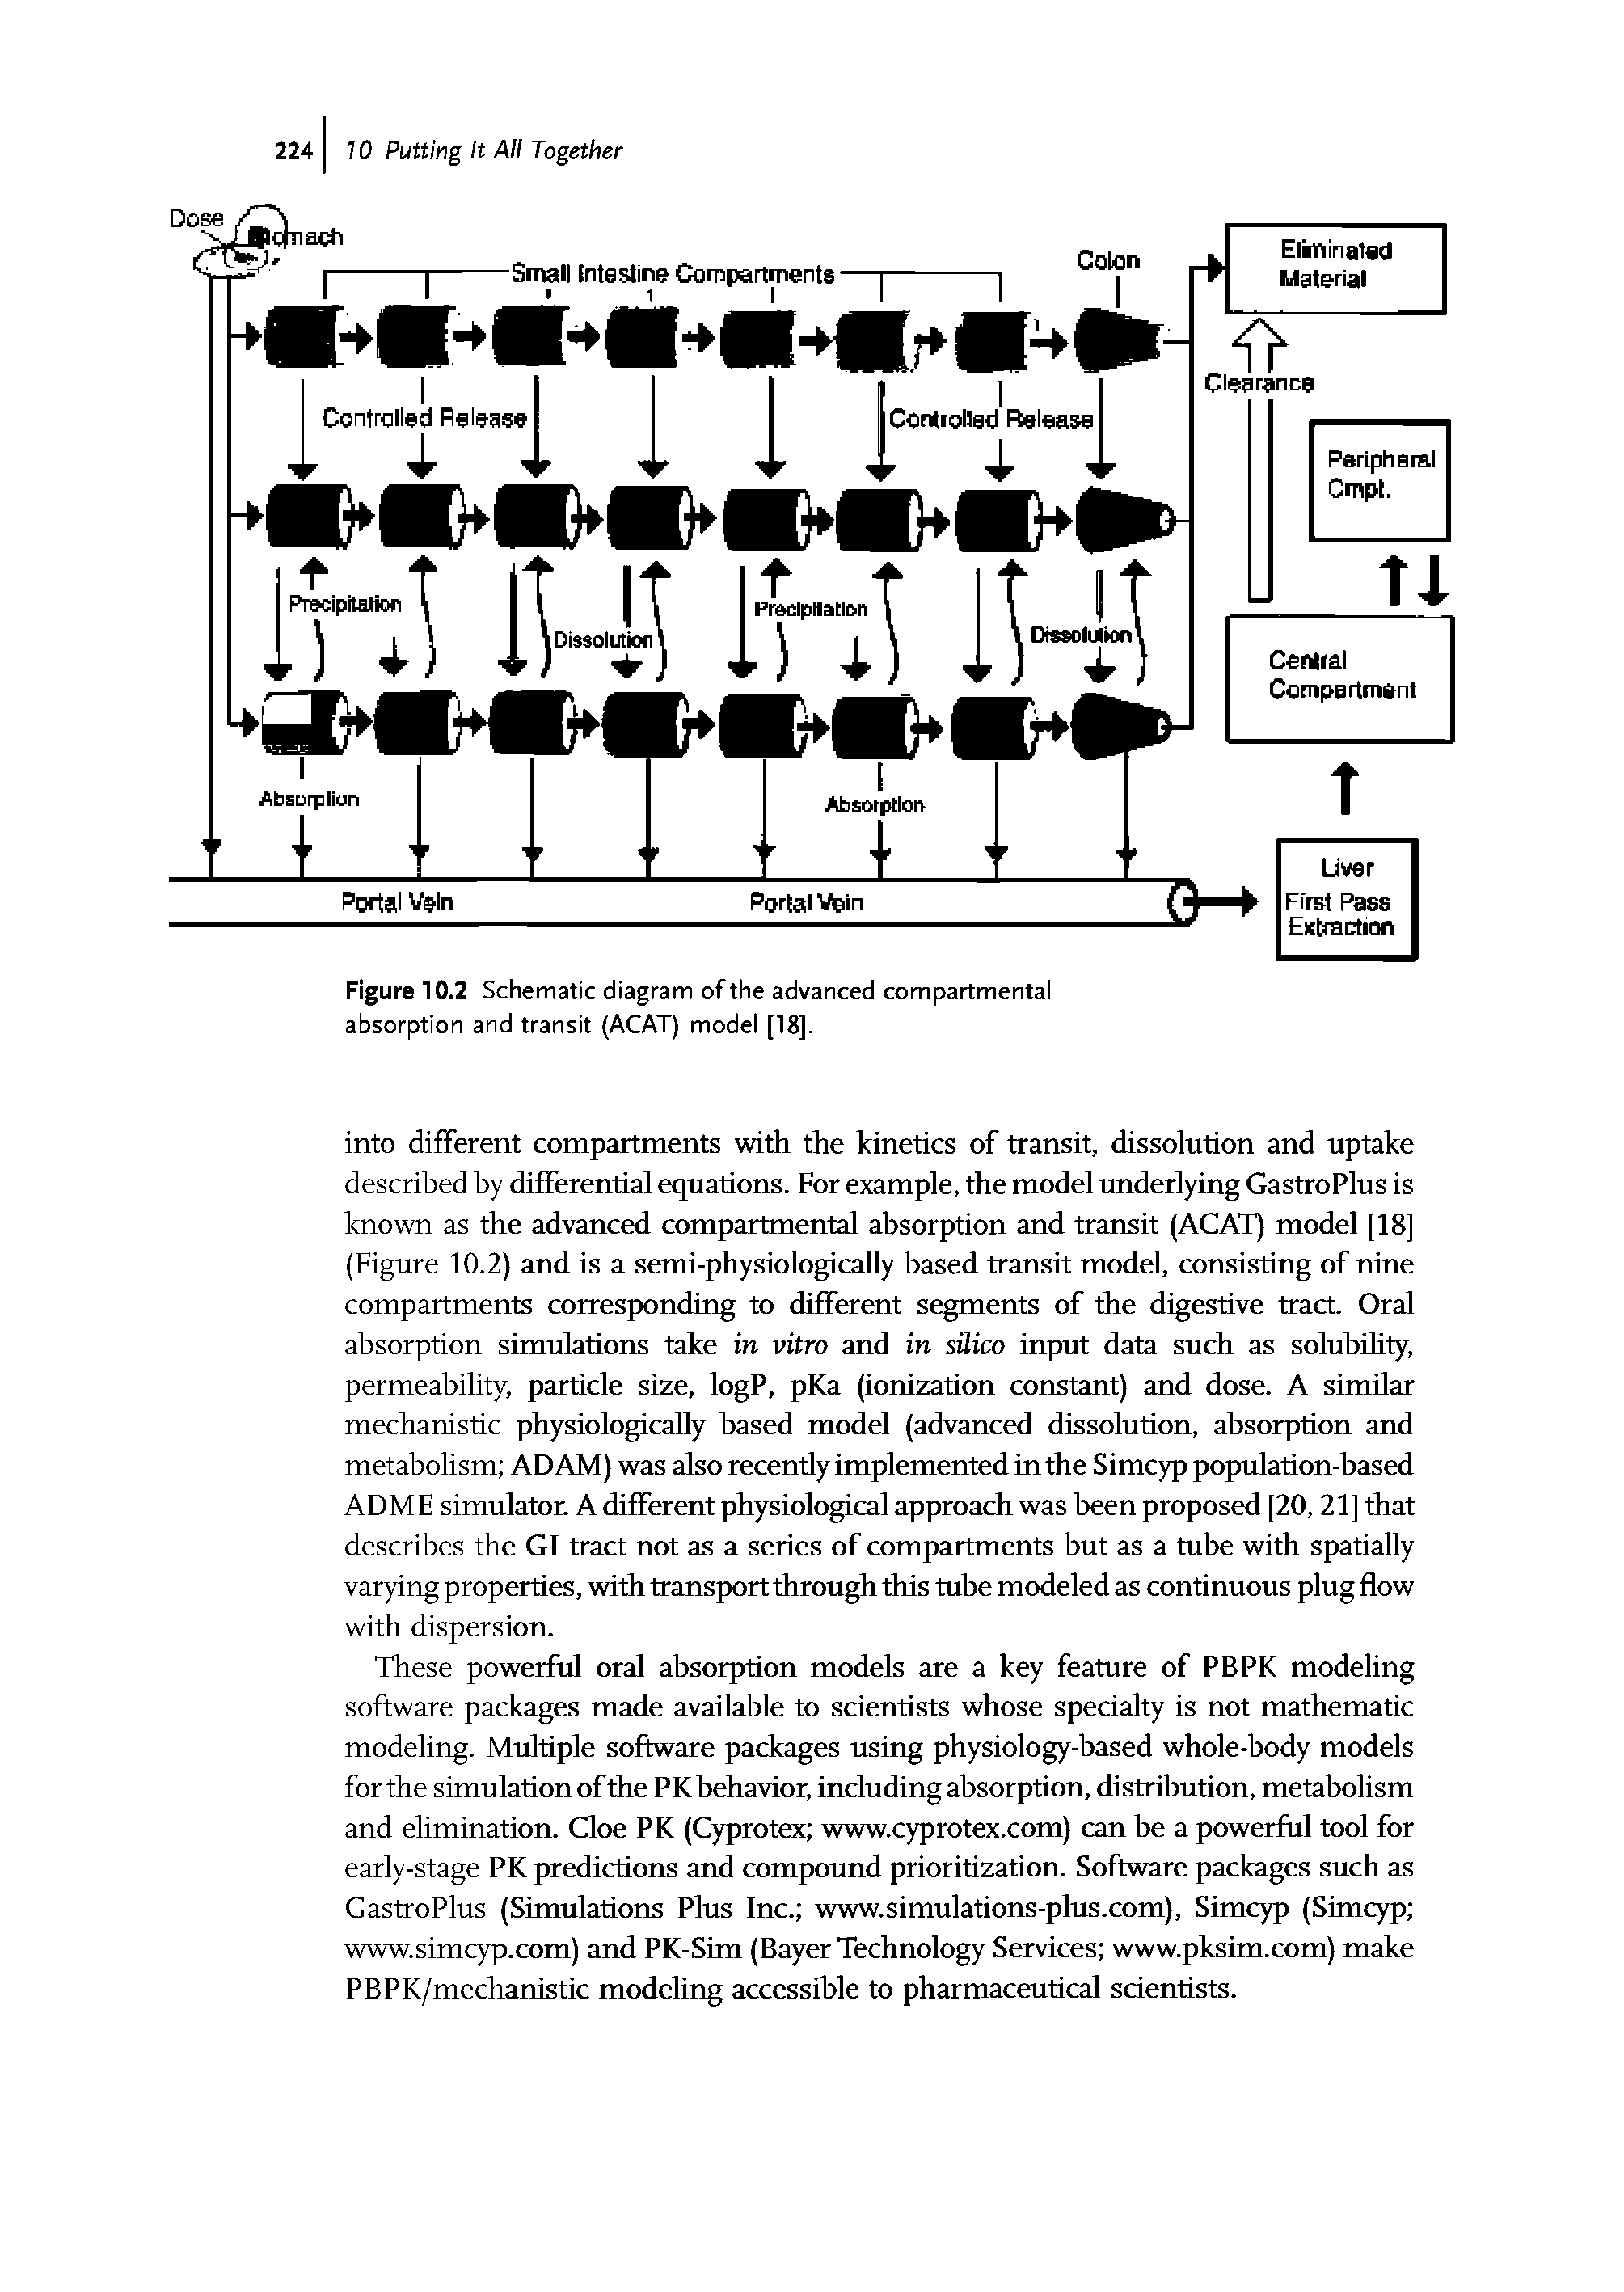 Figure 10.2 Schematic diagram of the advanced compartmental absorption and transit (ACAT) model [18].